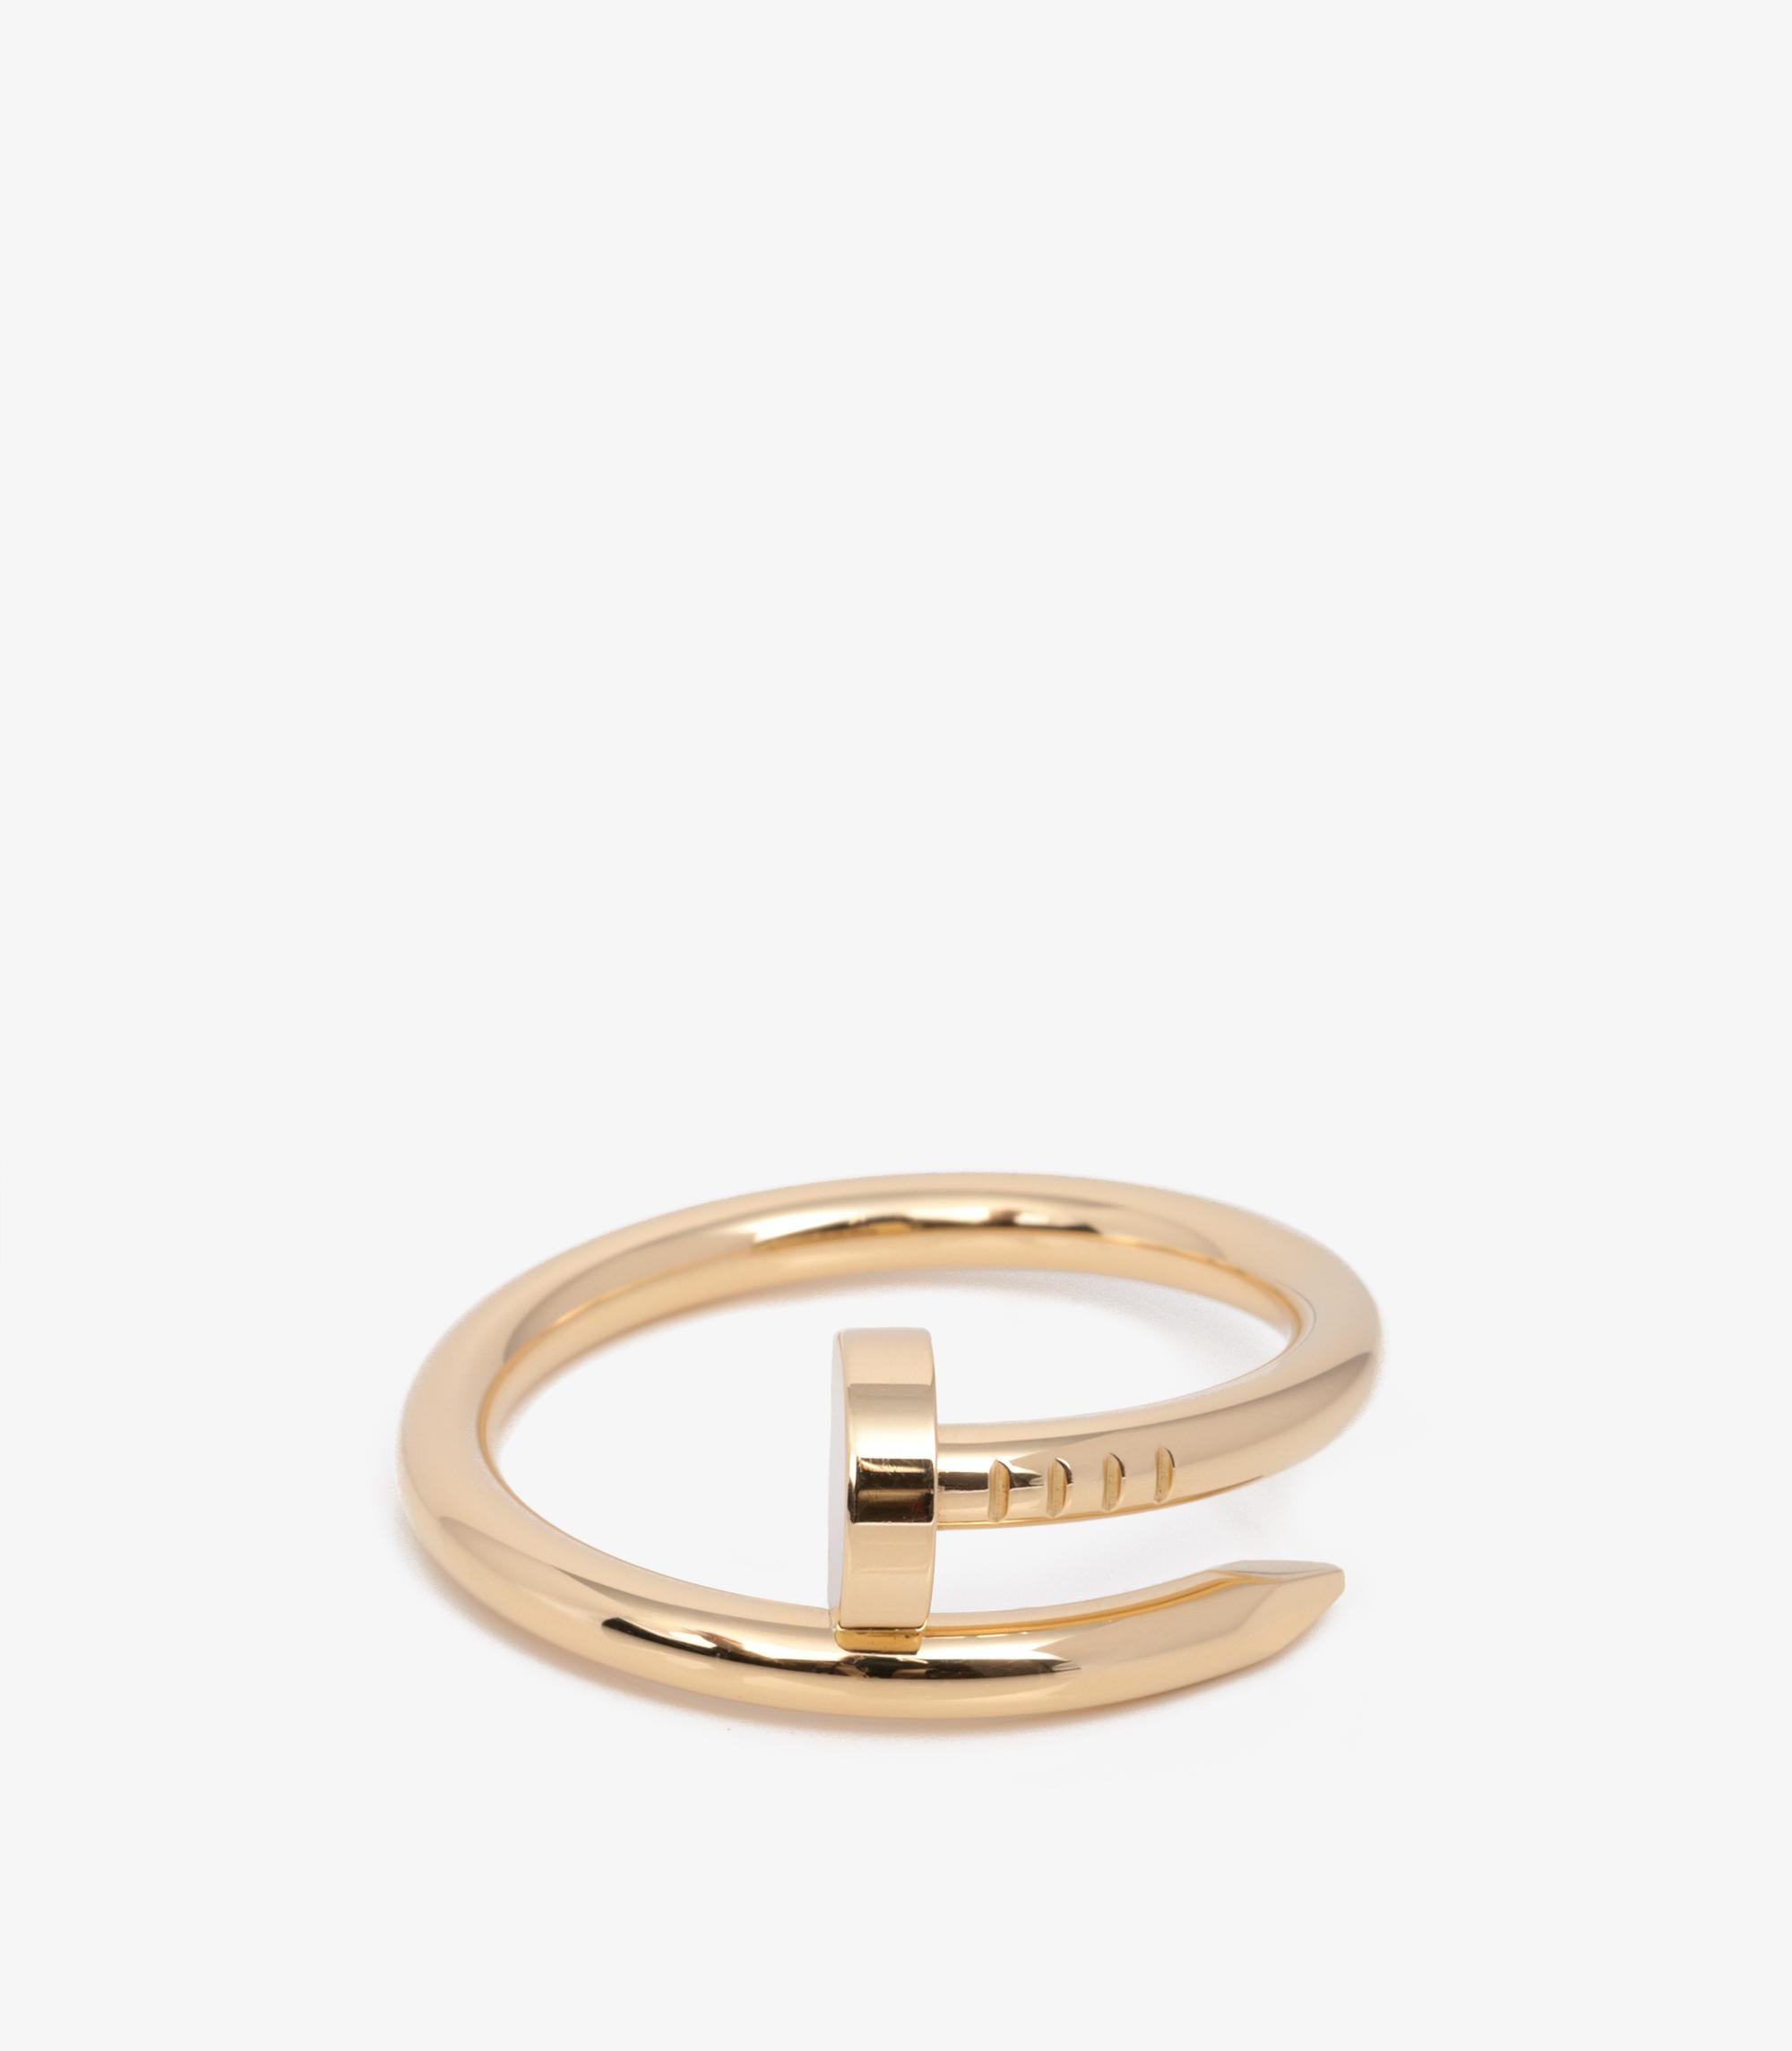 Cartier 18ct Yellow Gold Juste Un Clou Ring

Brand- Cartier
Model- Juste un Clou Ring
Product Type- Ring
Serial Number- RH****
Age- Circa 2020
Accompanied By- Cartier Box, Certificate, Copy of Receipt
Material(s)- 18ct Yellow Gold
UK Ring Size- U